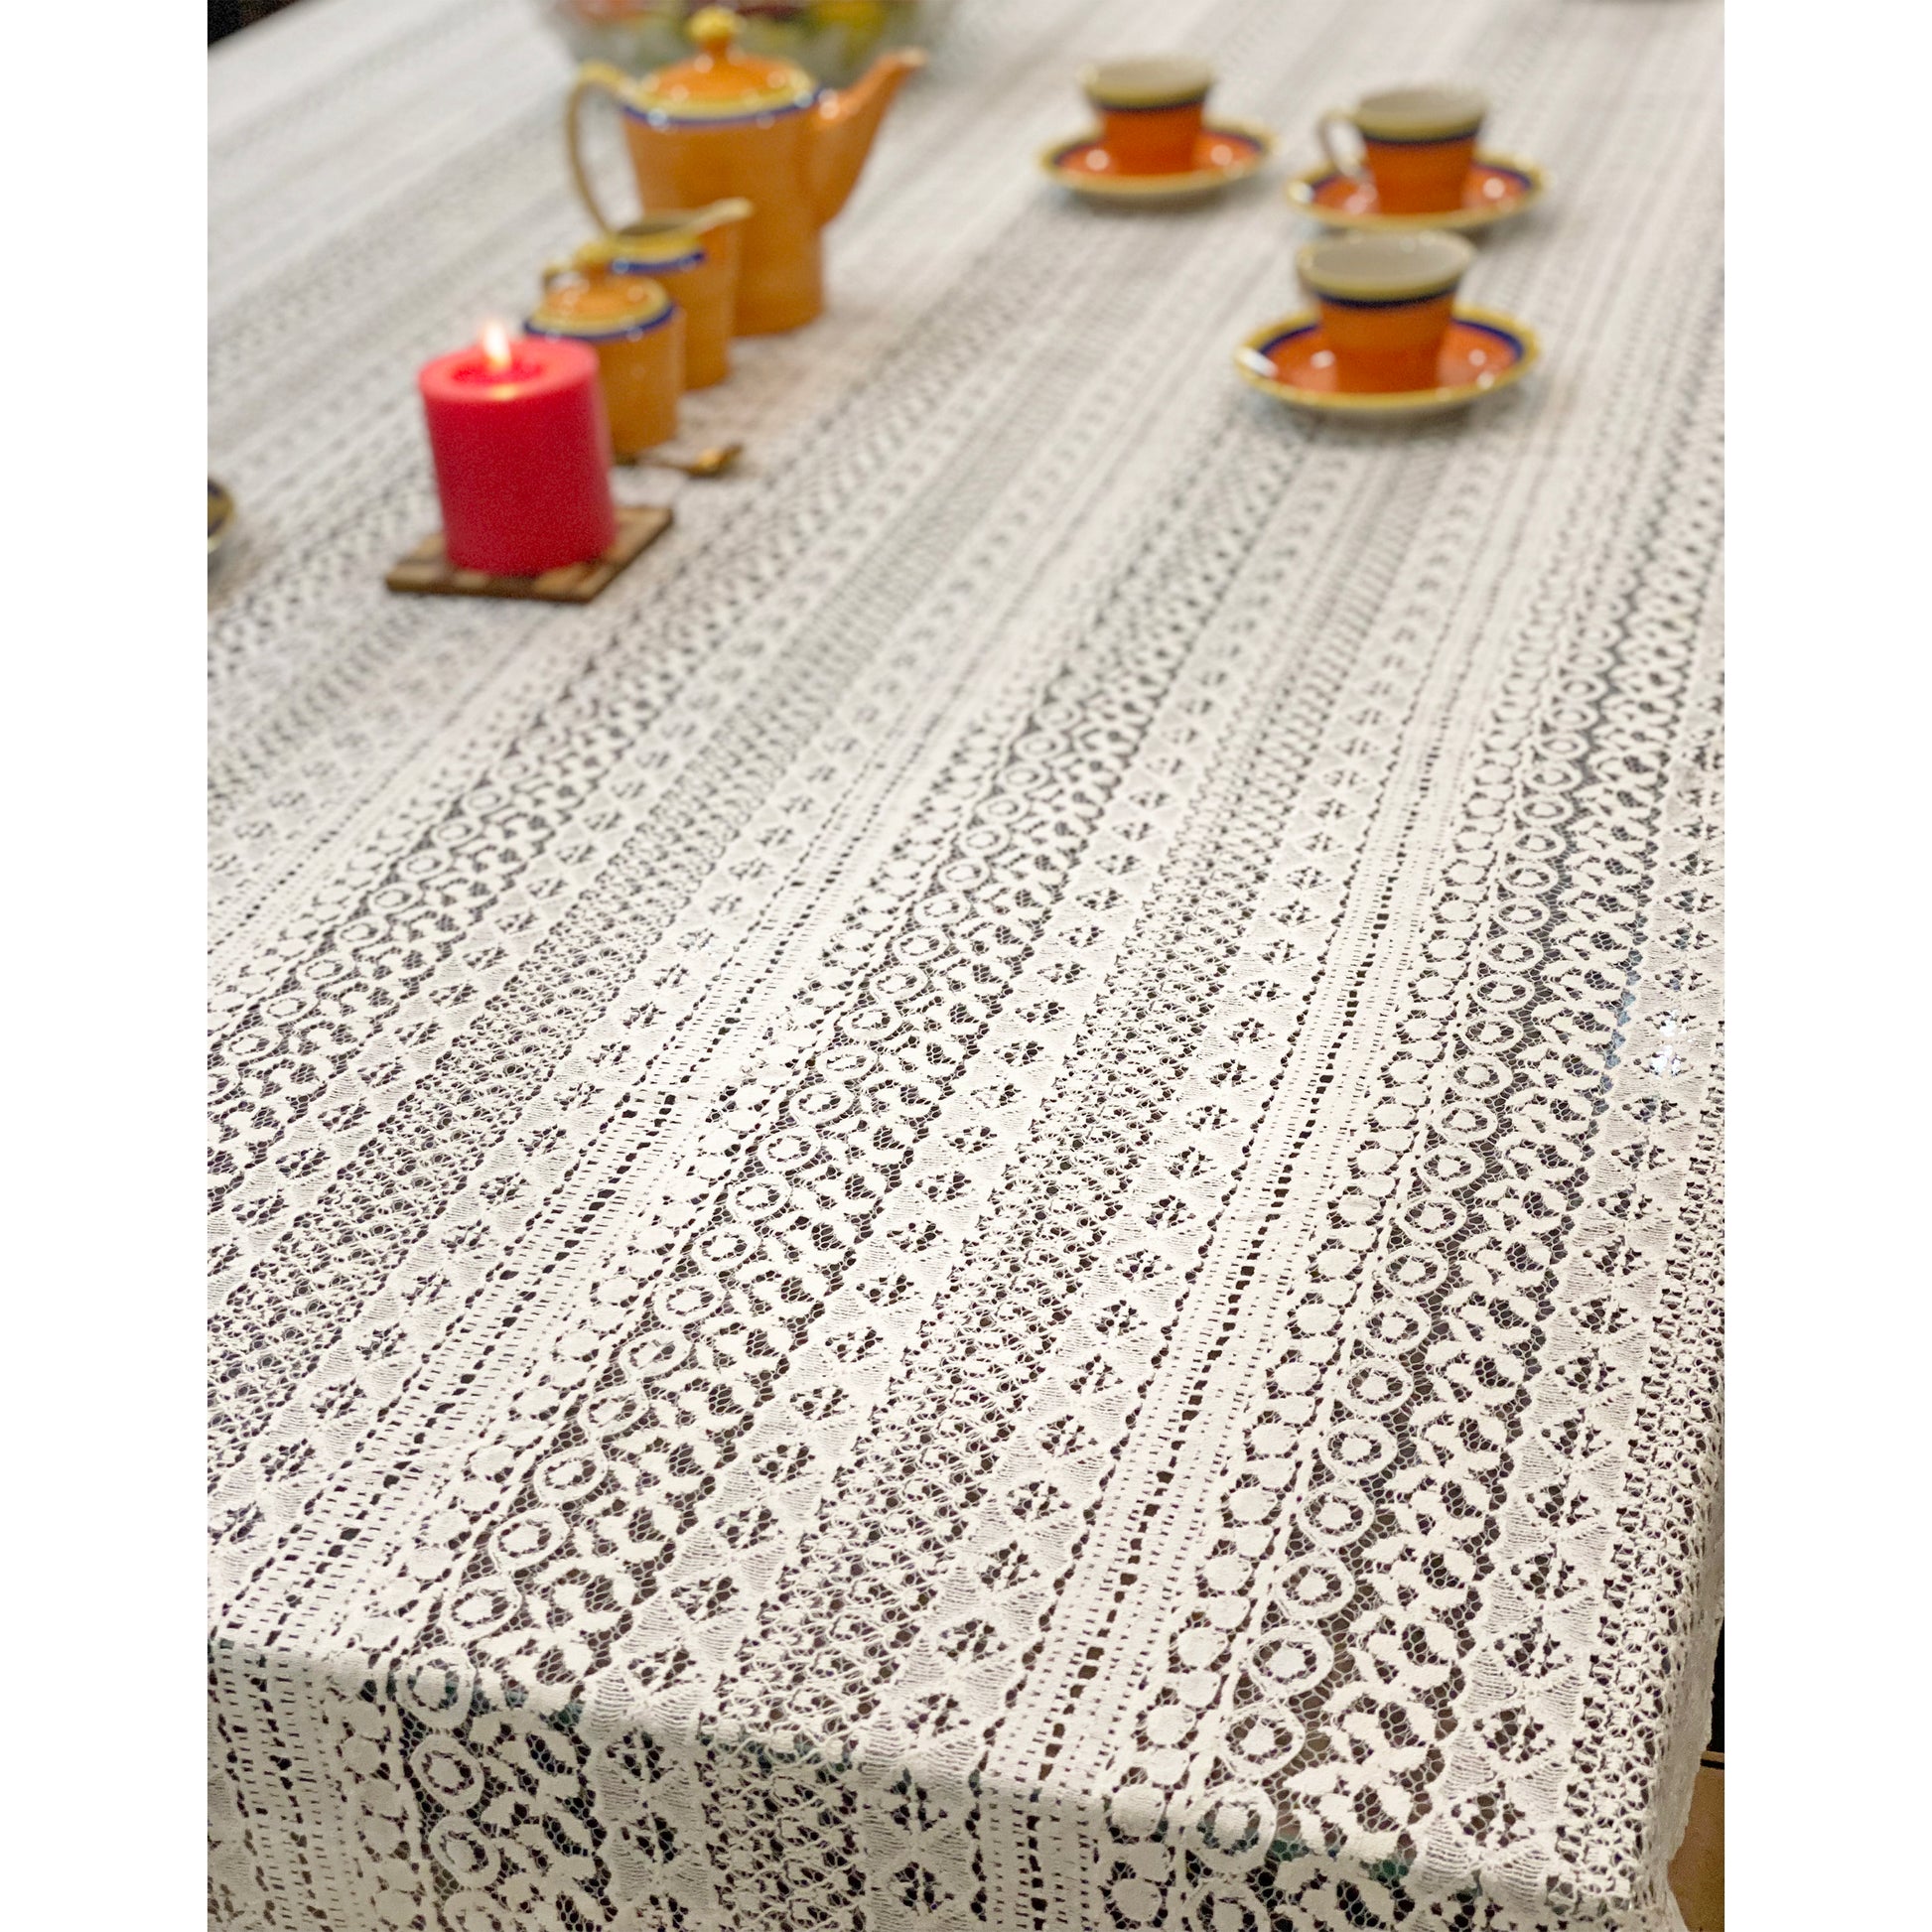 victorian-style-net-table-cloth-for-dinner-parties